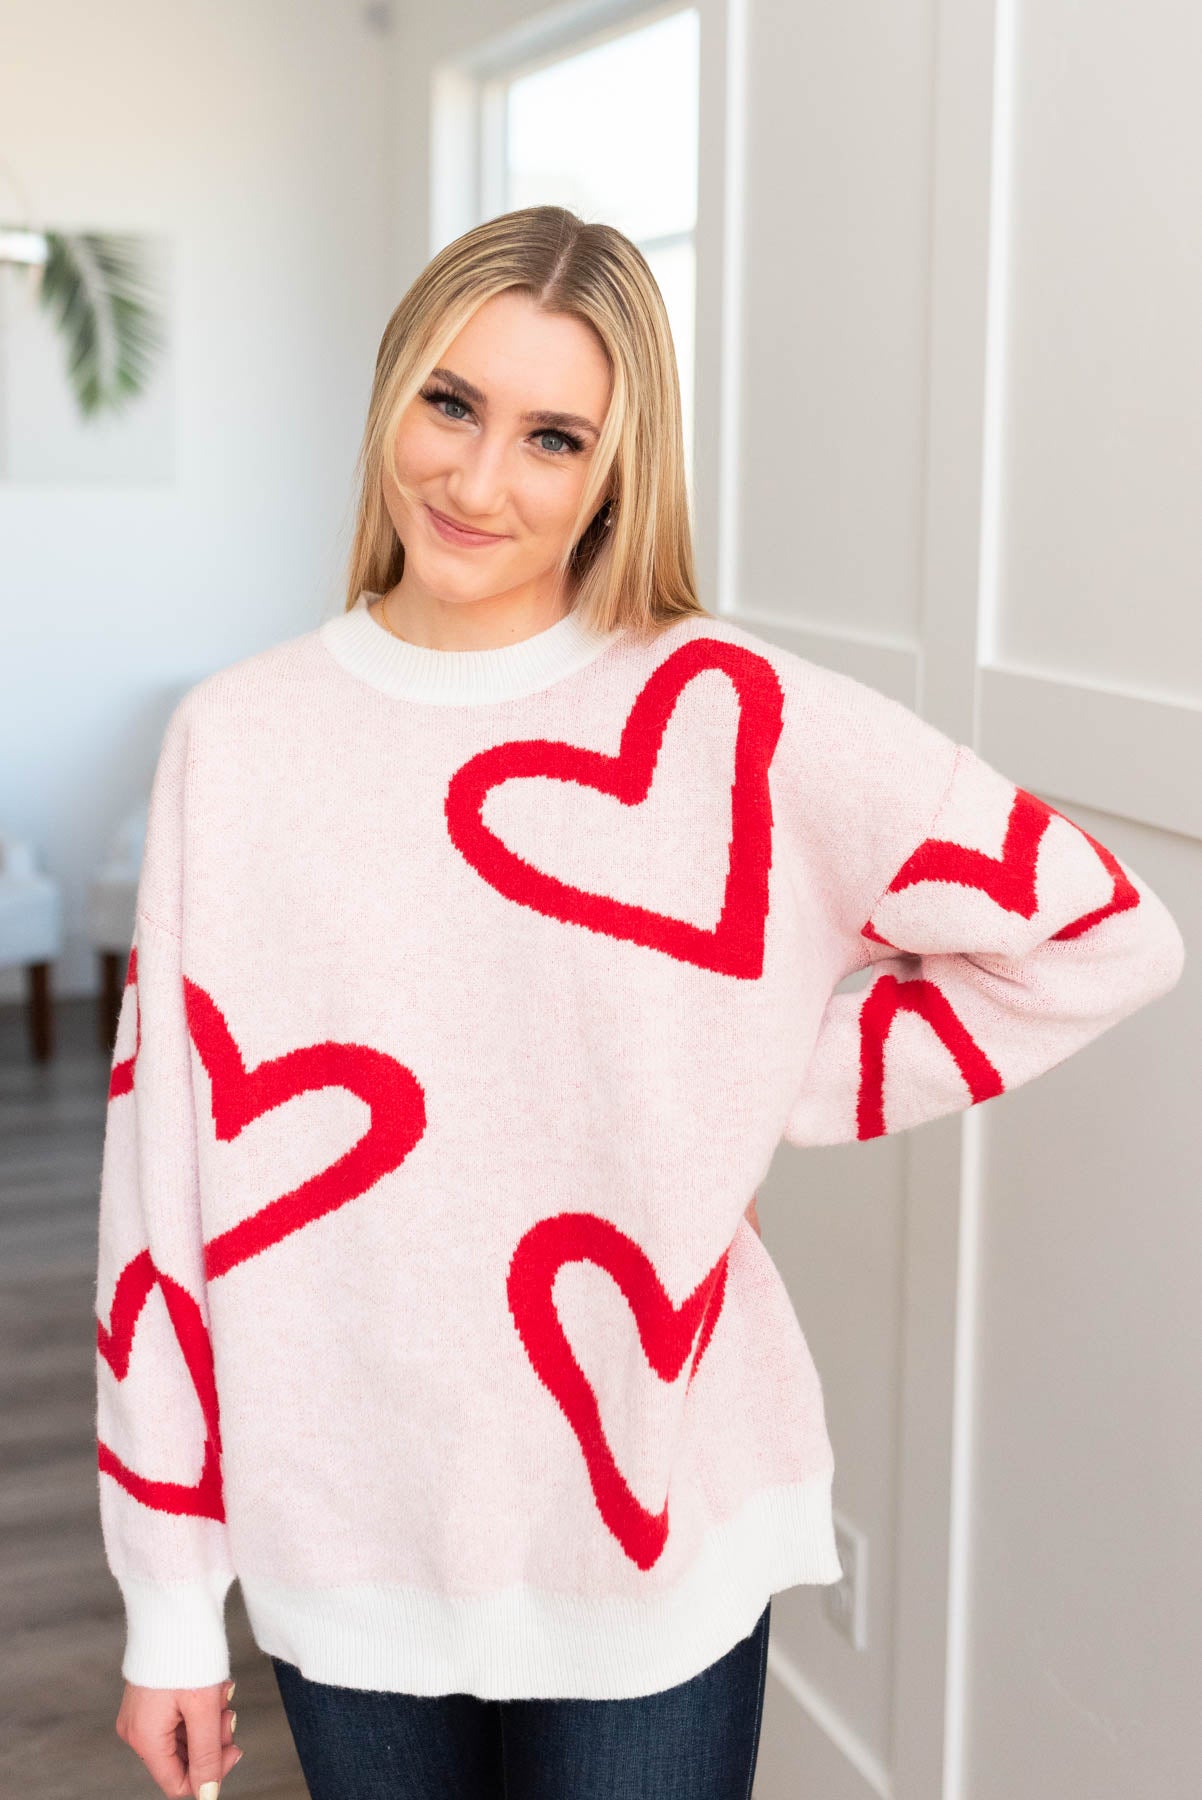 Red heart sweater with large hearts